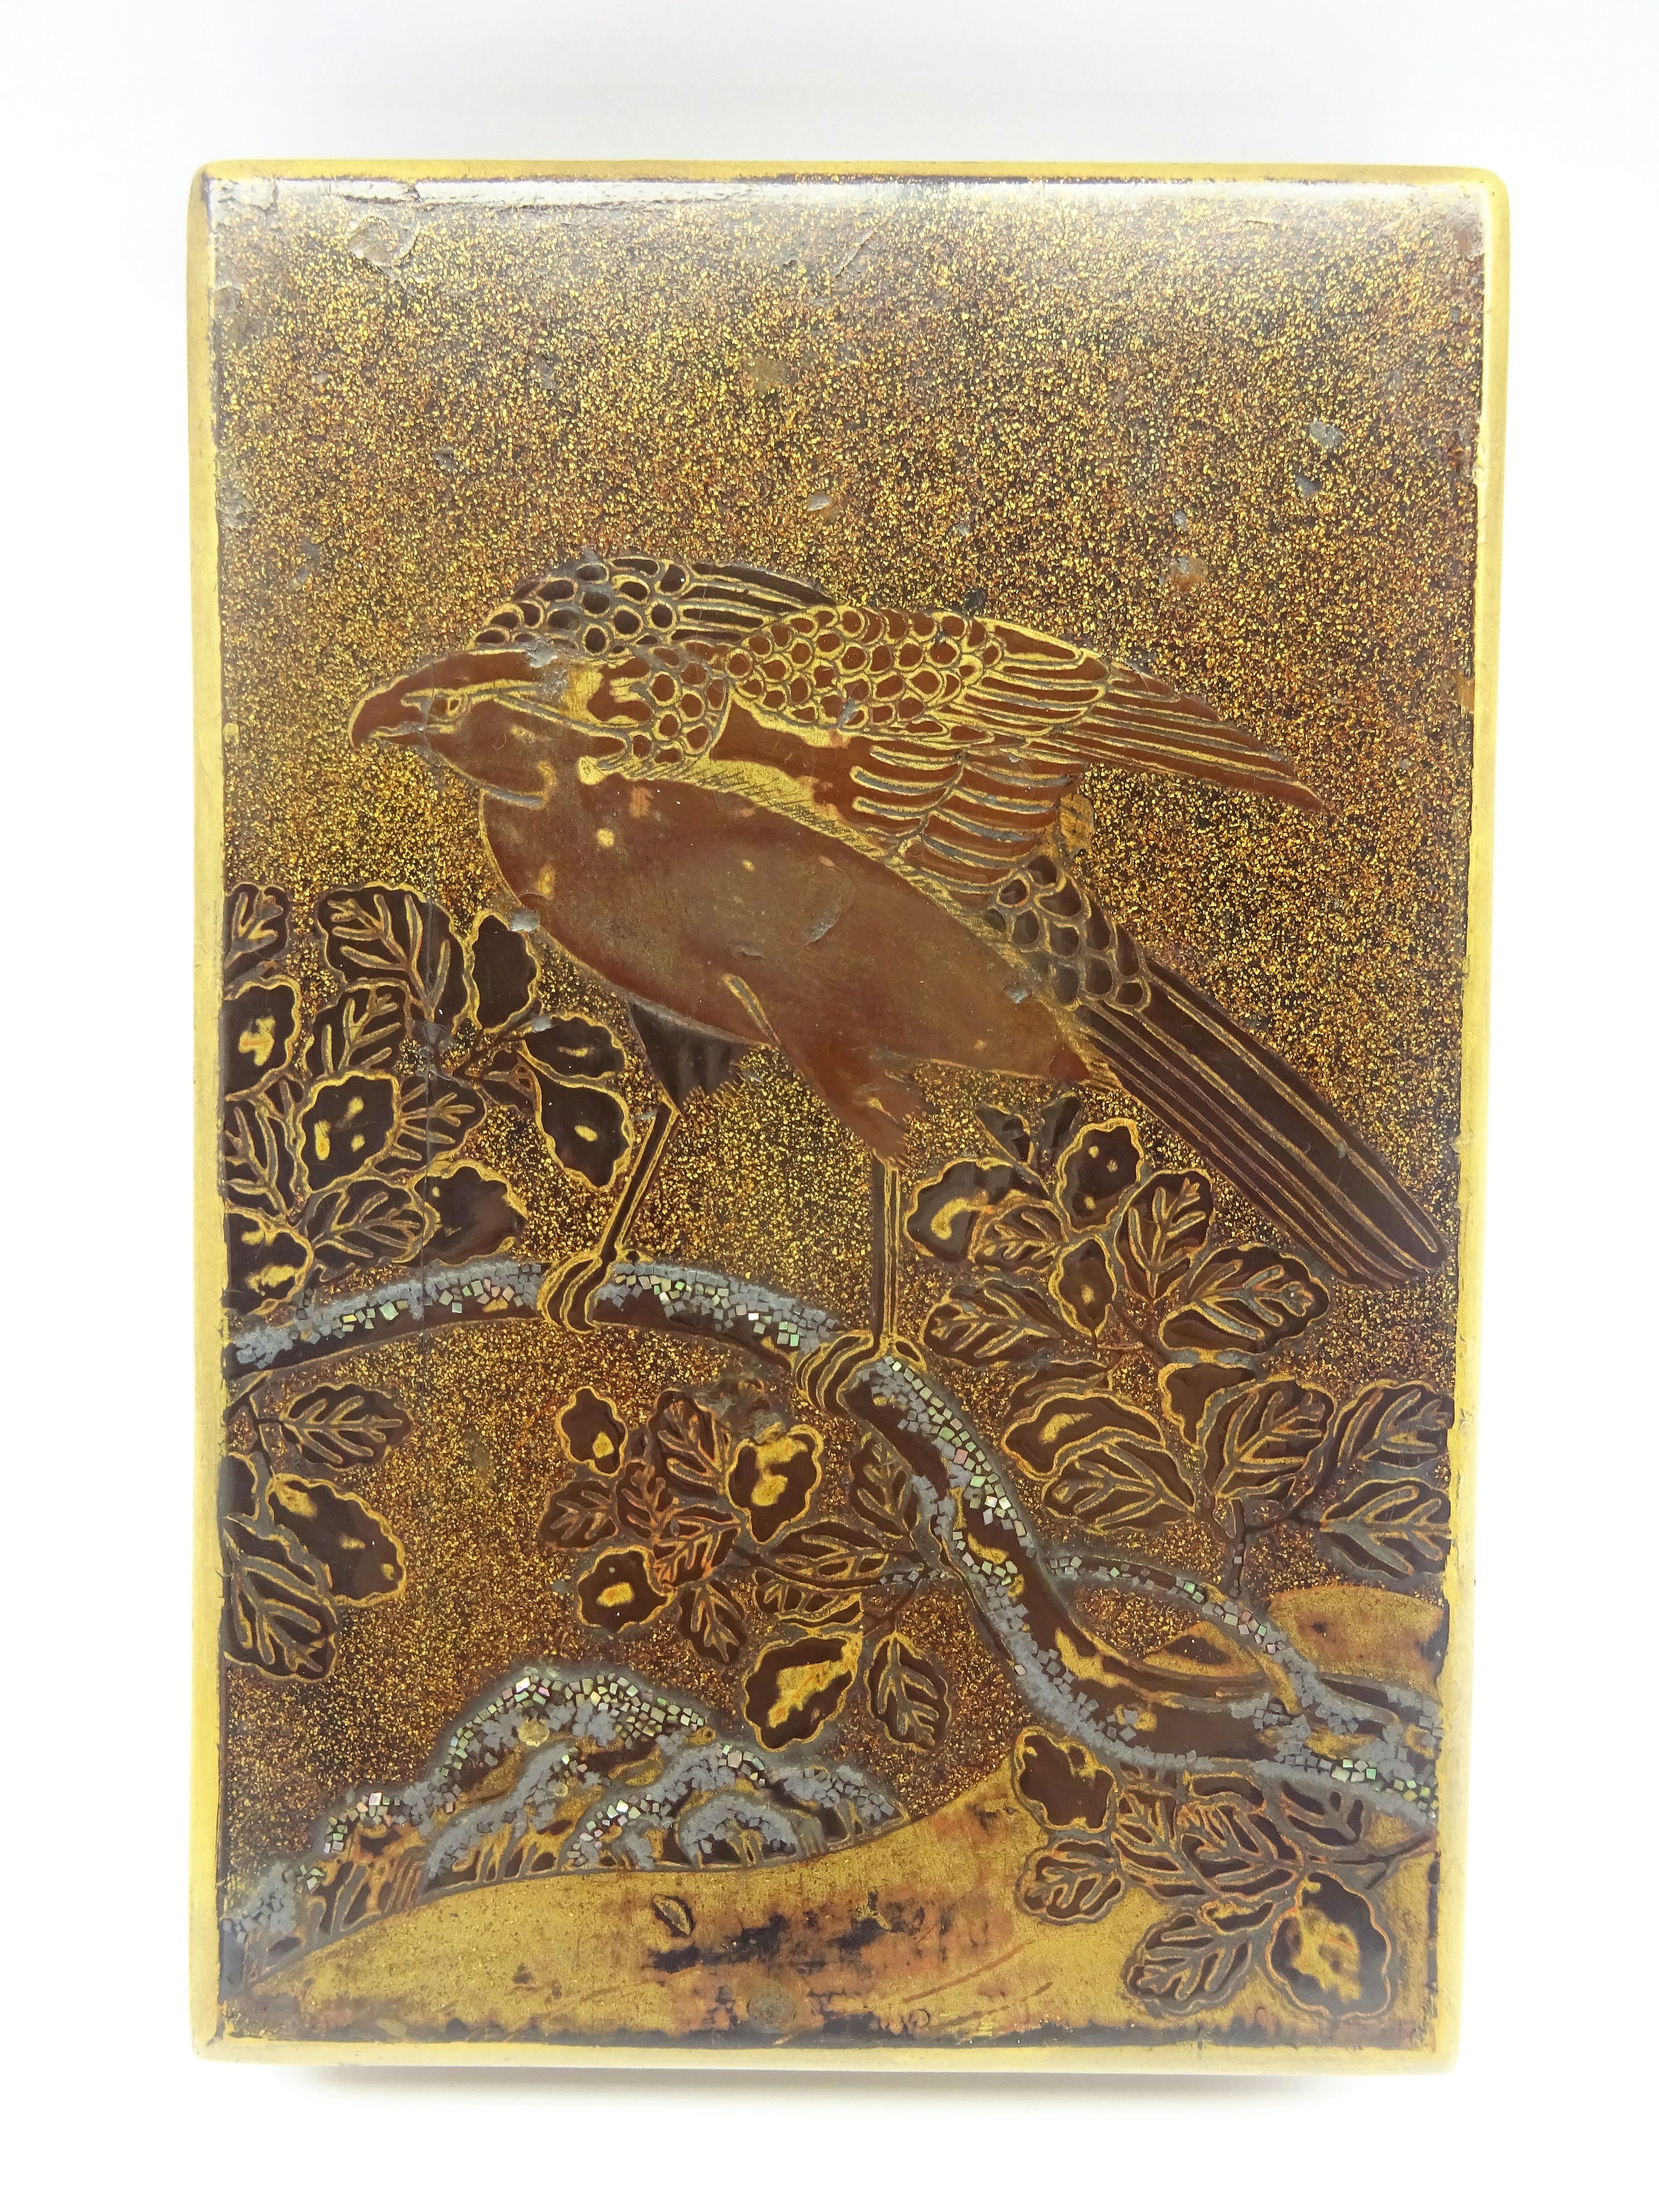 Another Japanese lacquer box, Edo period (18th Century) with a falcon on a flowering branch in gold,